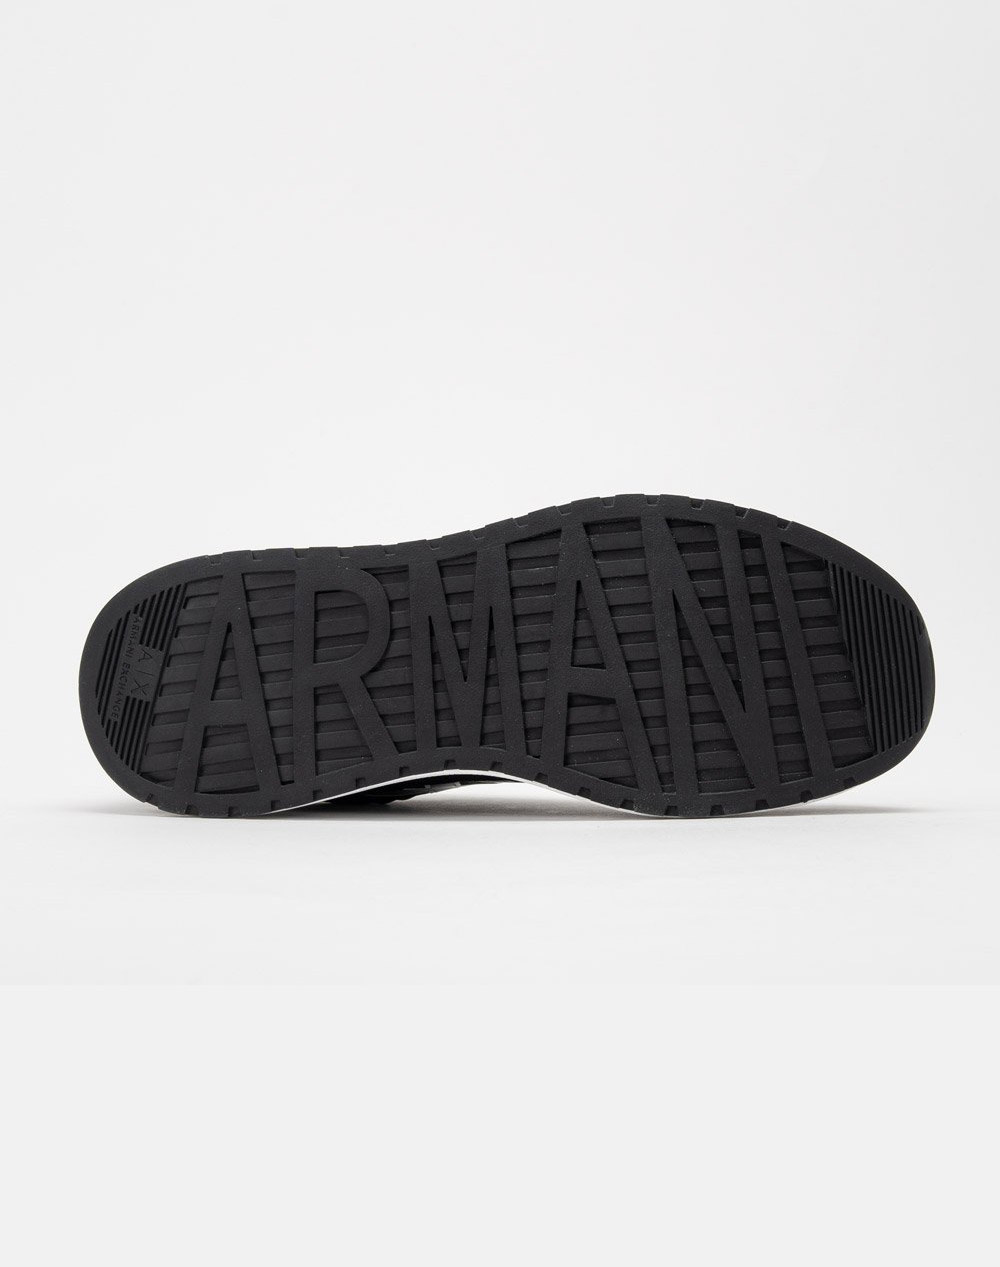 Armani Exchange Black Leather Sneakers | Designerwear | Signup for an  Exclusive Discount Code